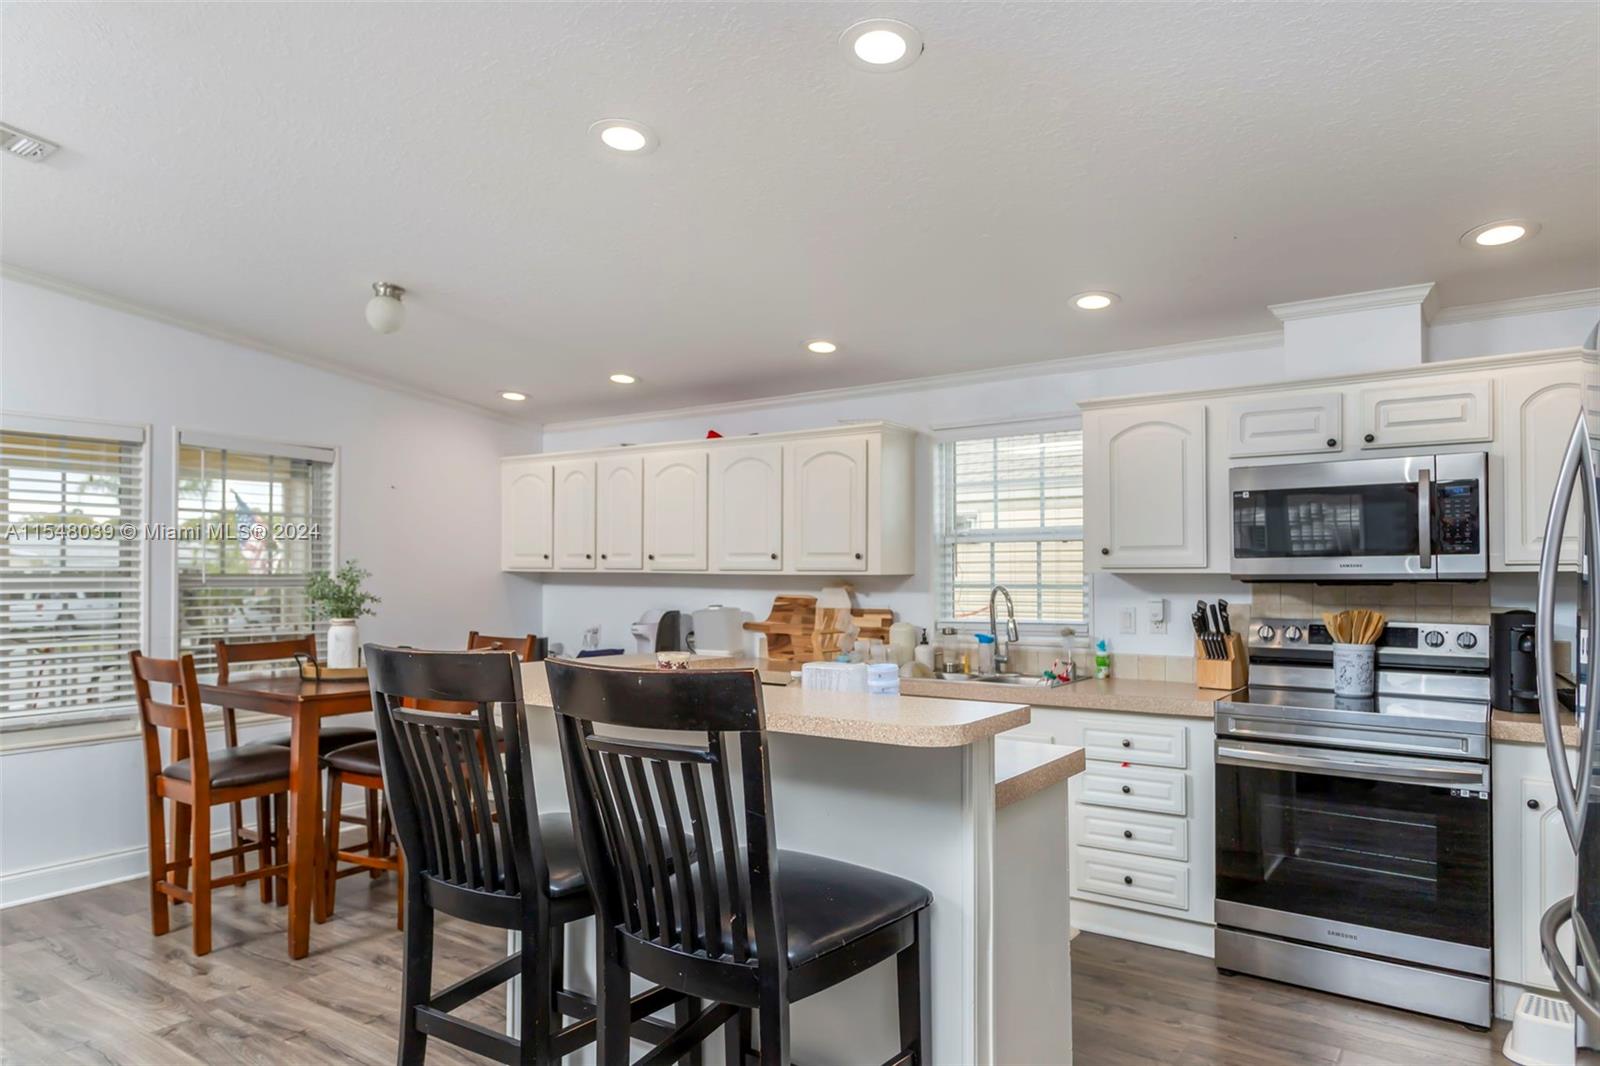 a kitchen with stainless steel appliances kitchen island granite countertop a table chairs microwave and sink